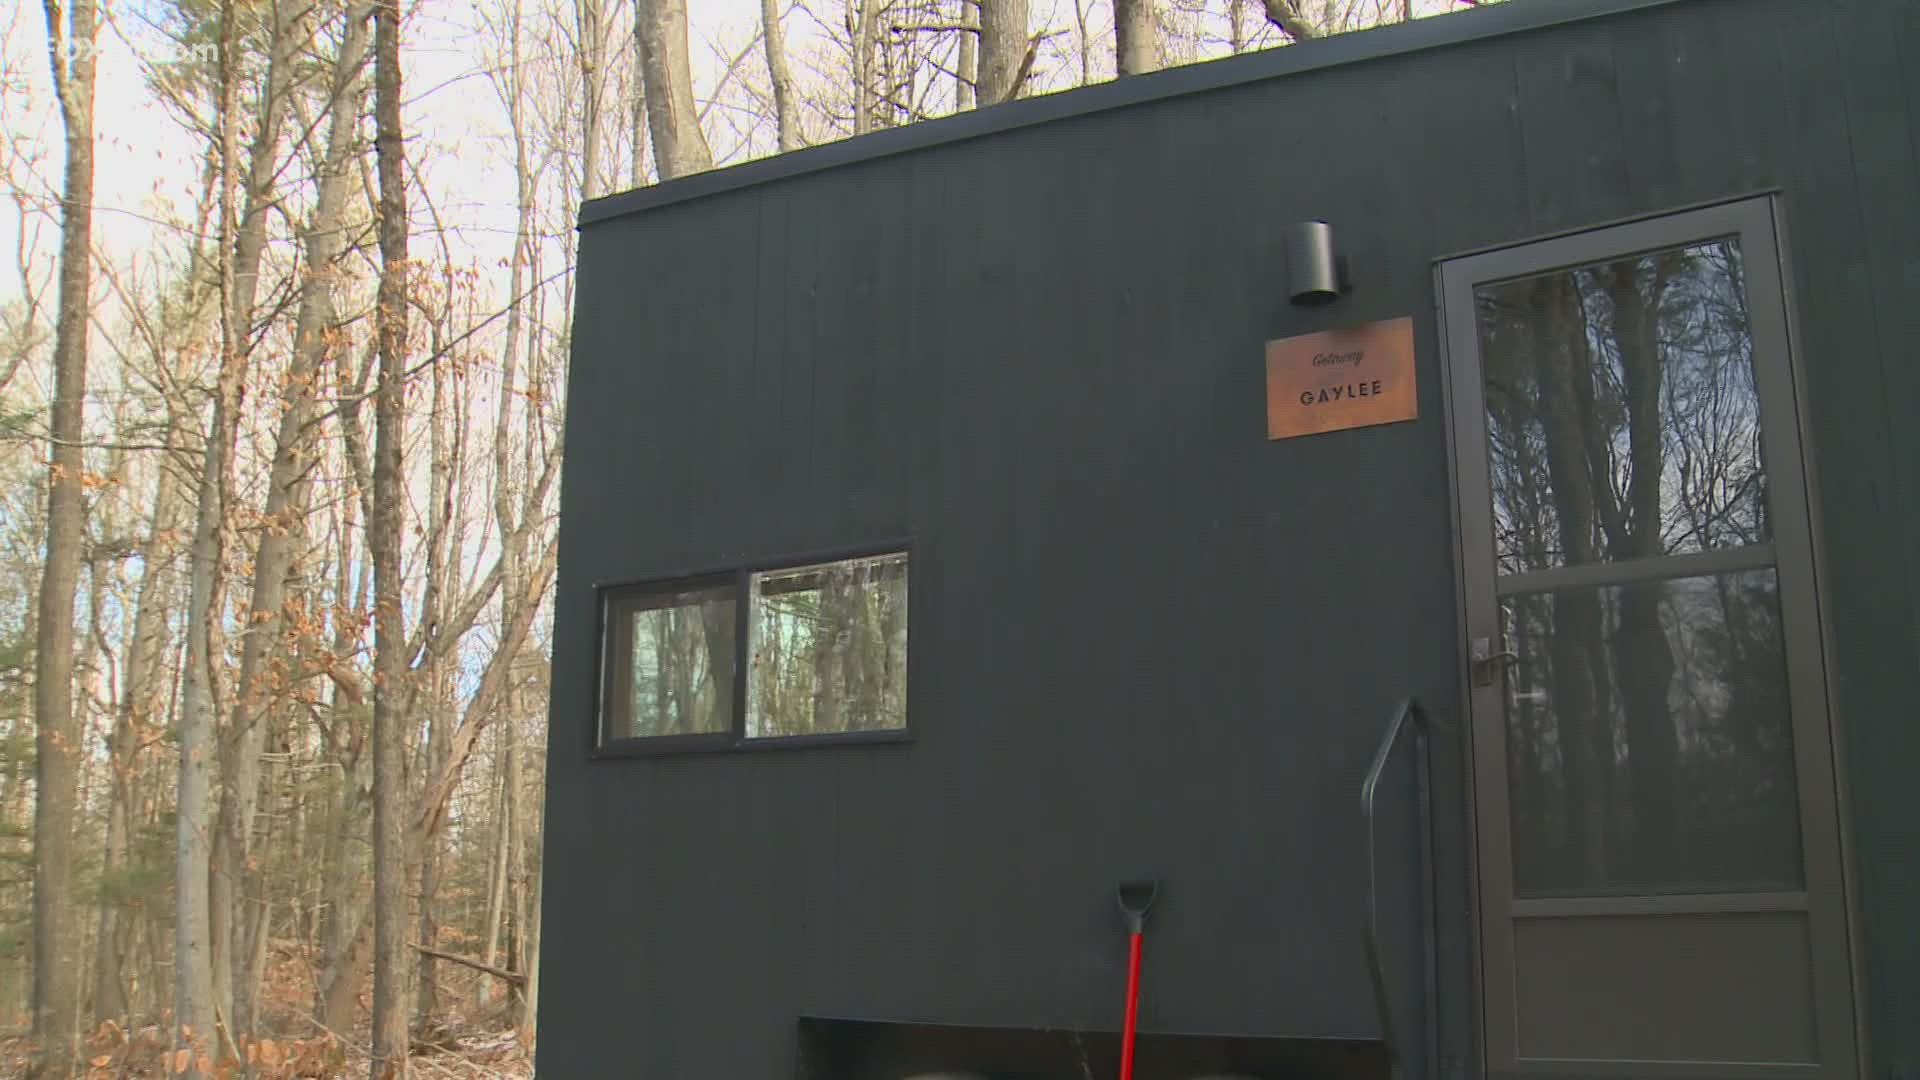 The big news in East Haddam? Think small. The "Tiny Cabin" trend has arrived in Connecticut.